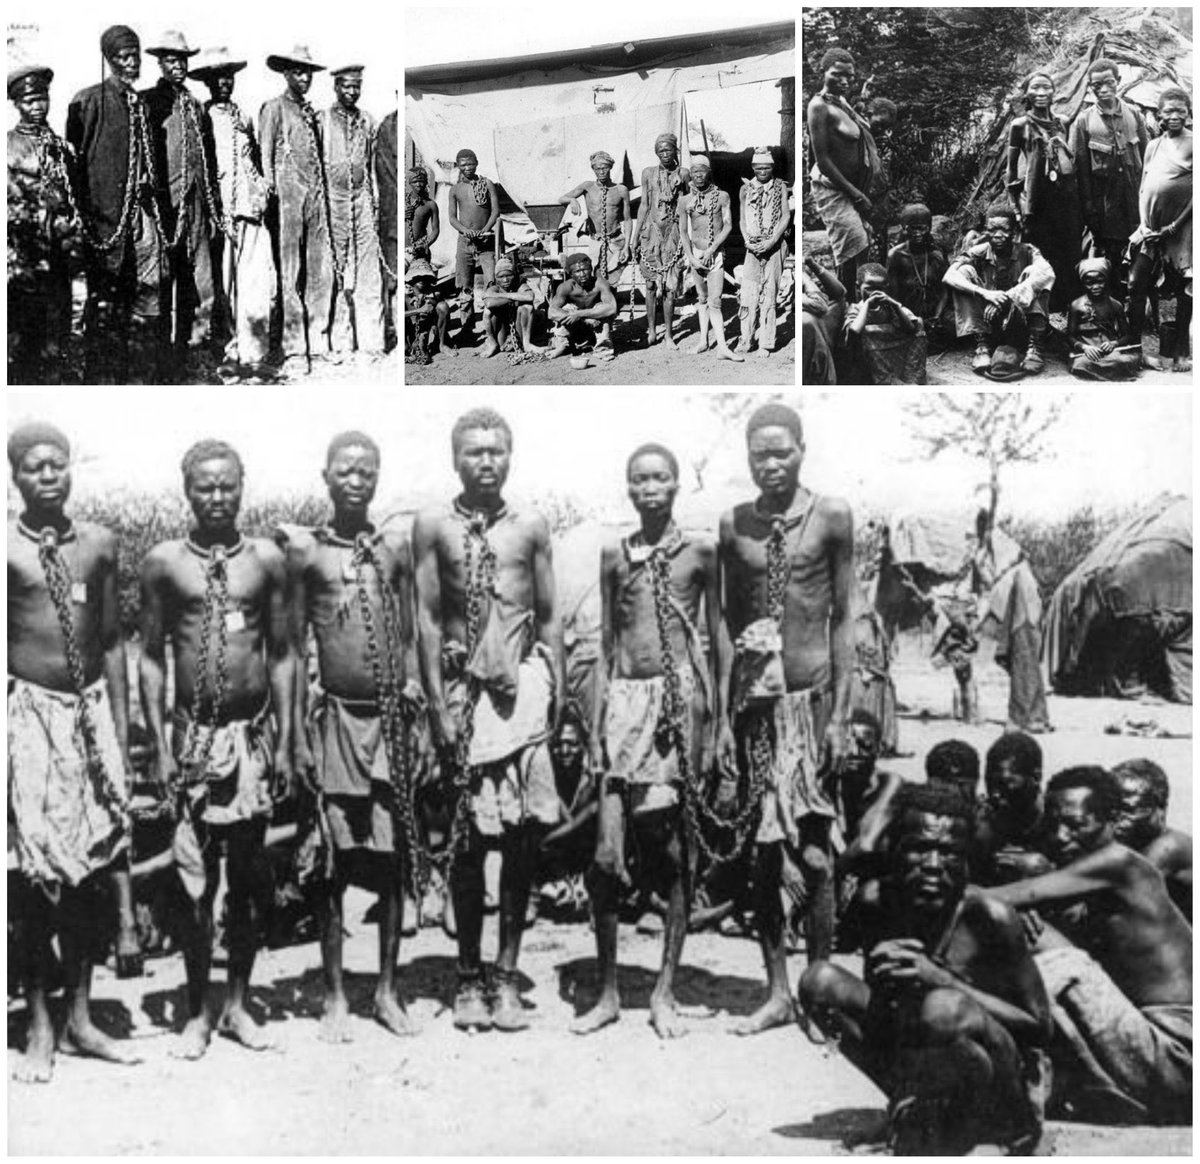 20th century's first genocide, was a concerted extermination of over 100,000 Heroro people by the Germans in today's Namibia. An additional 50,000 Herero were shipped off to Europe during World War I to fight. They never came back. Some images of captured Herero people getting